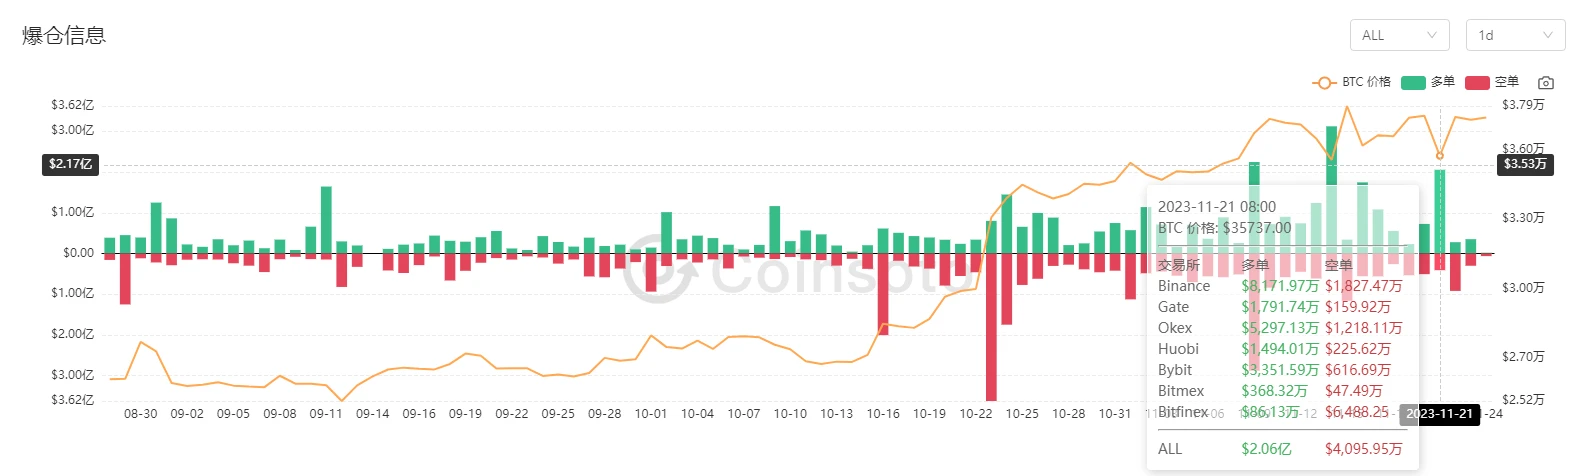 Crypto Market Sentiment Research Report (11.17–11.26): CZ admits the charges, currency prices remain strong